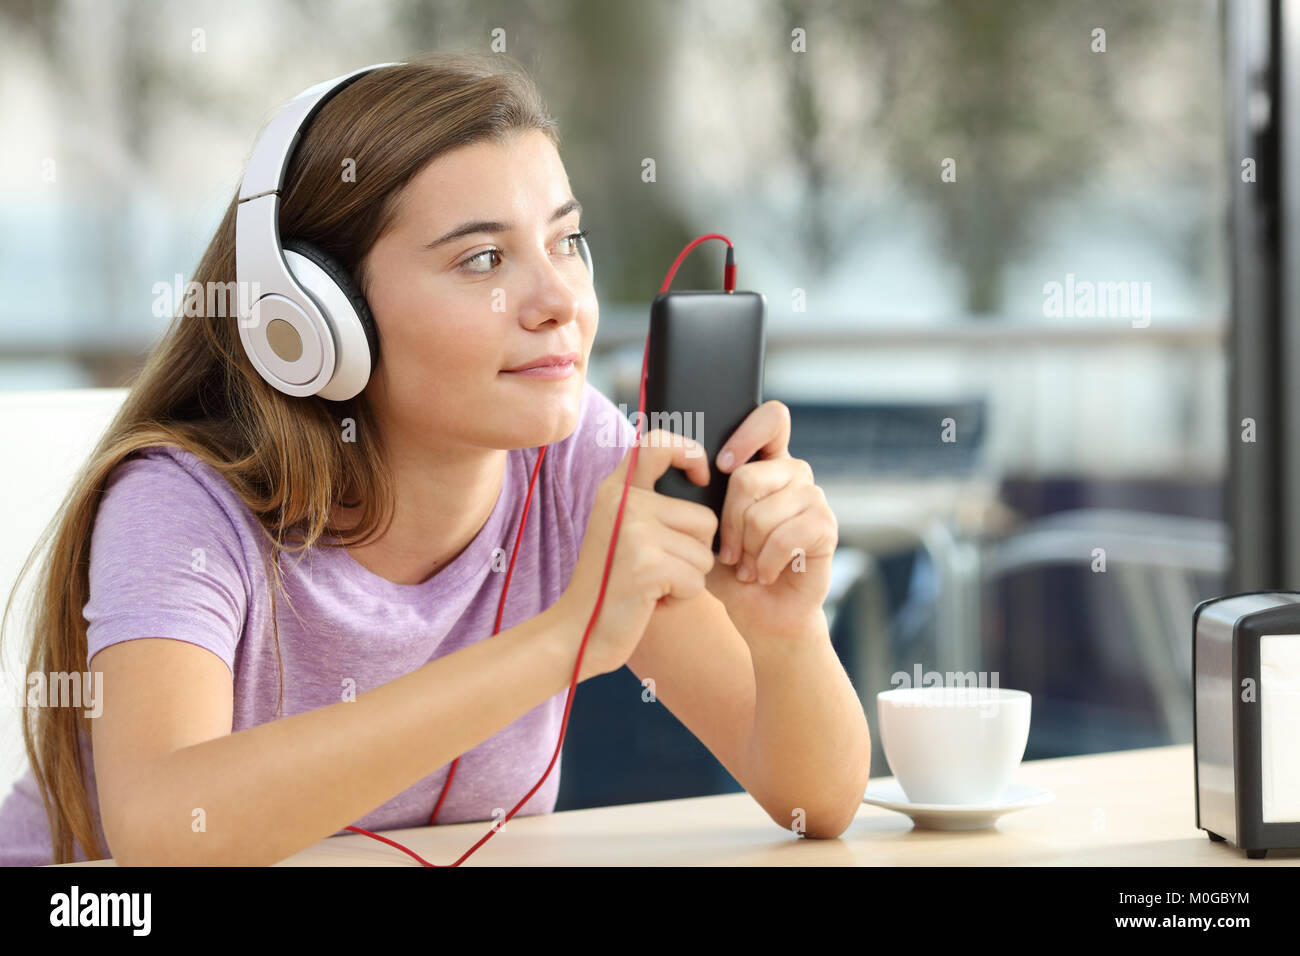 Single teen wearing headphones listening to music from a smart phone in a coffee shop terrace Stock Photo